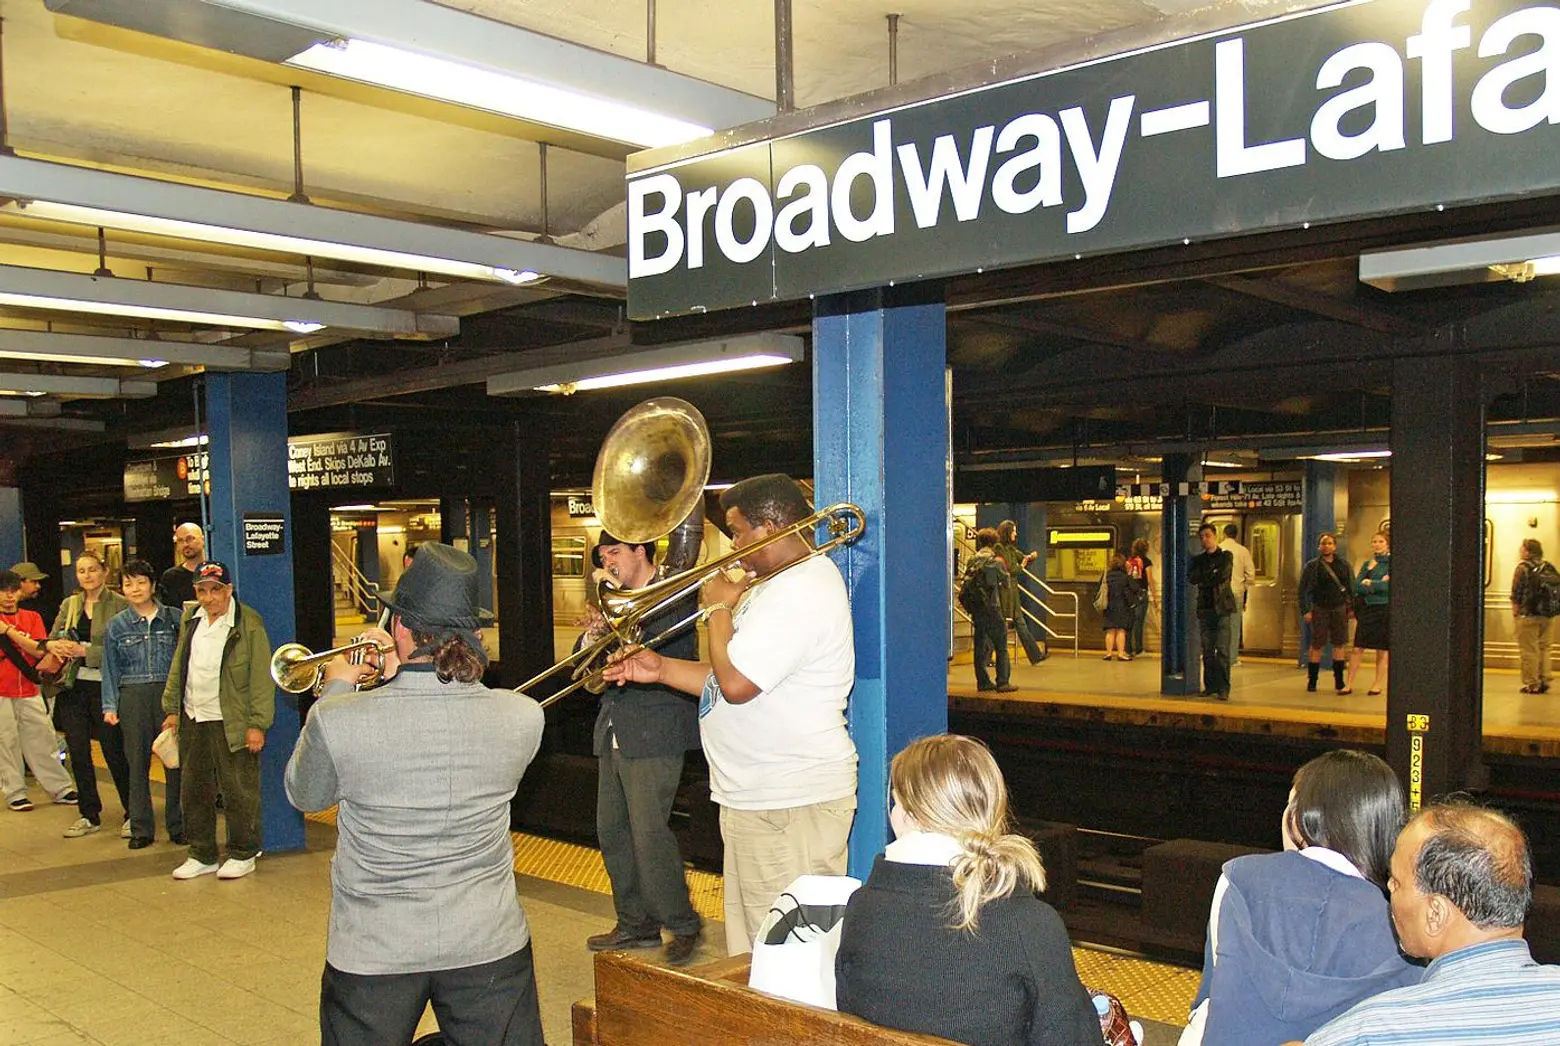 NYC subway performers have the chance to stream their shows for a global audience